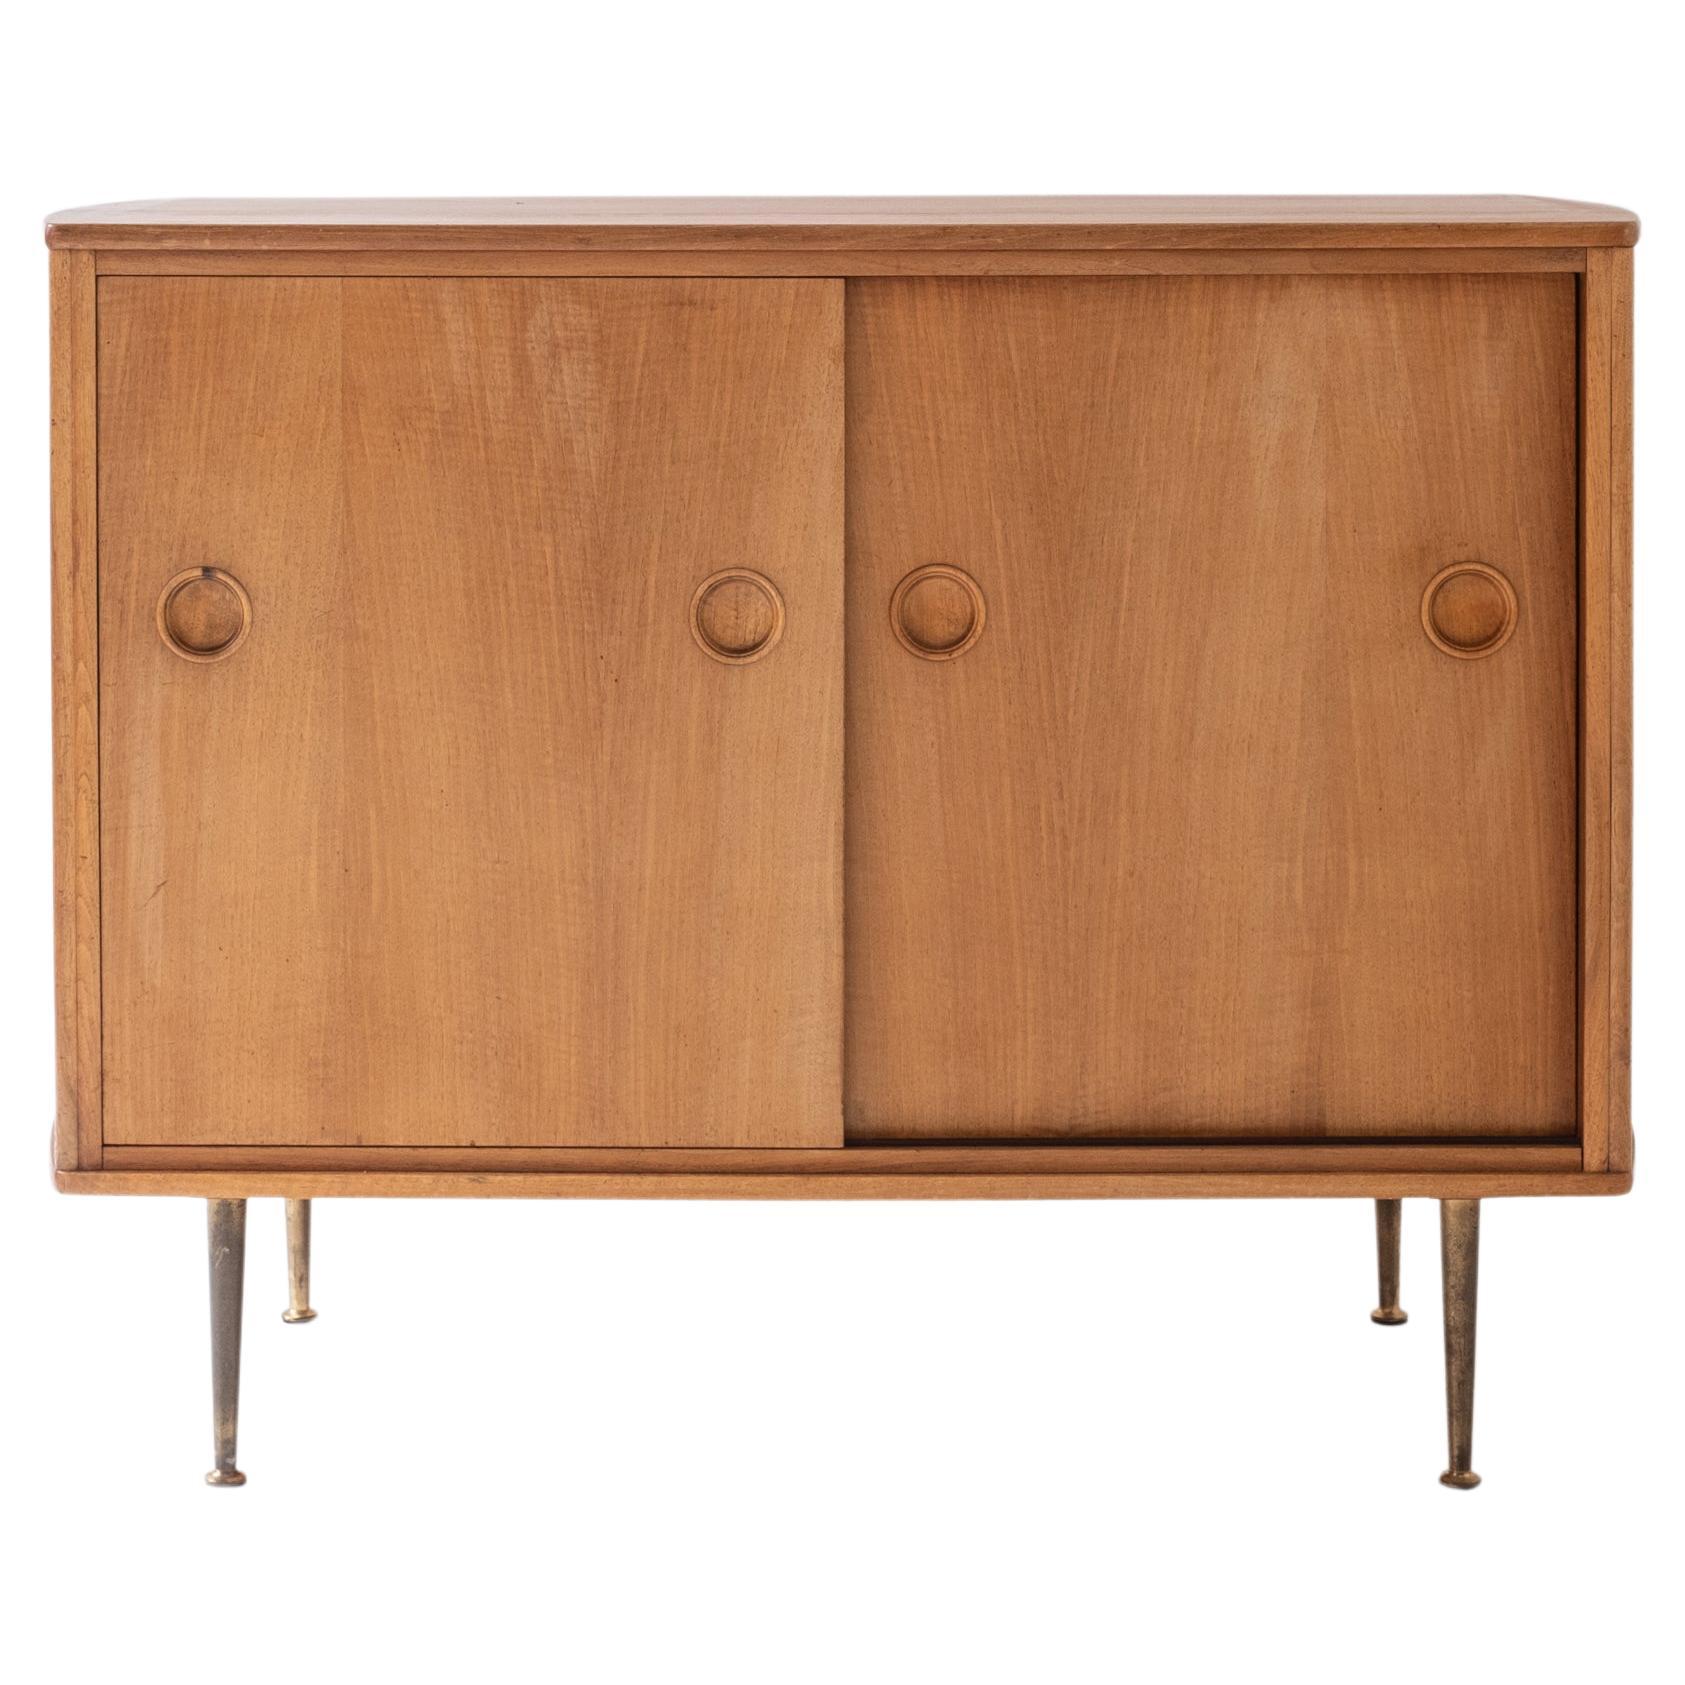 Cabinet designed by William Watting for Fristho Franeker, The Netherlands 1950’s